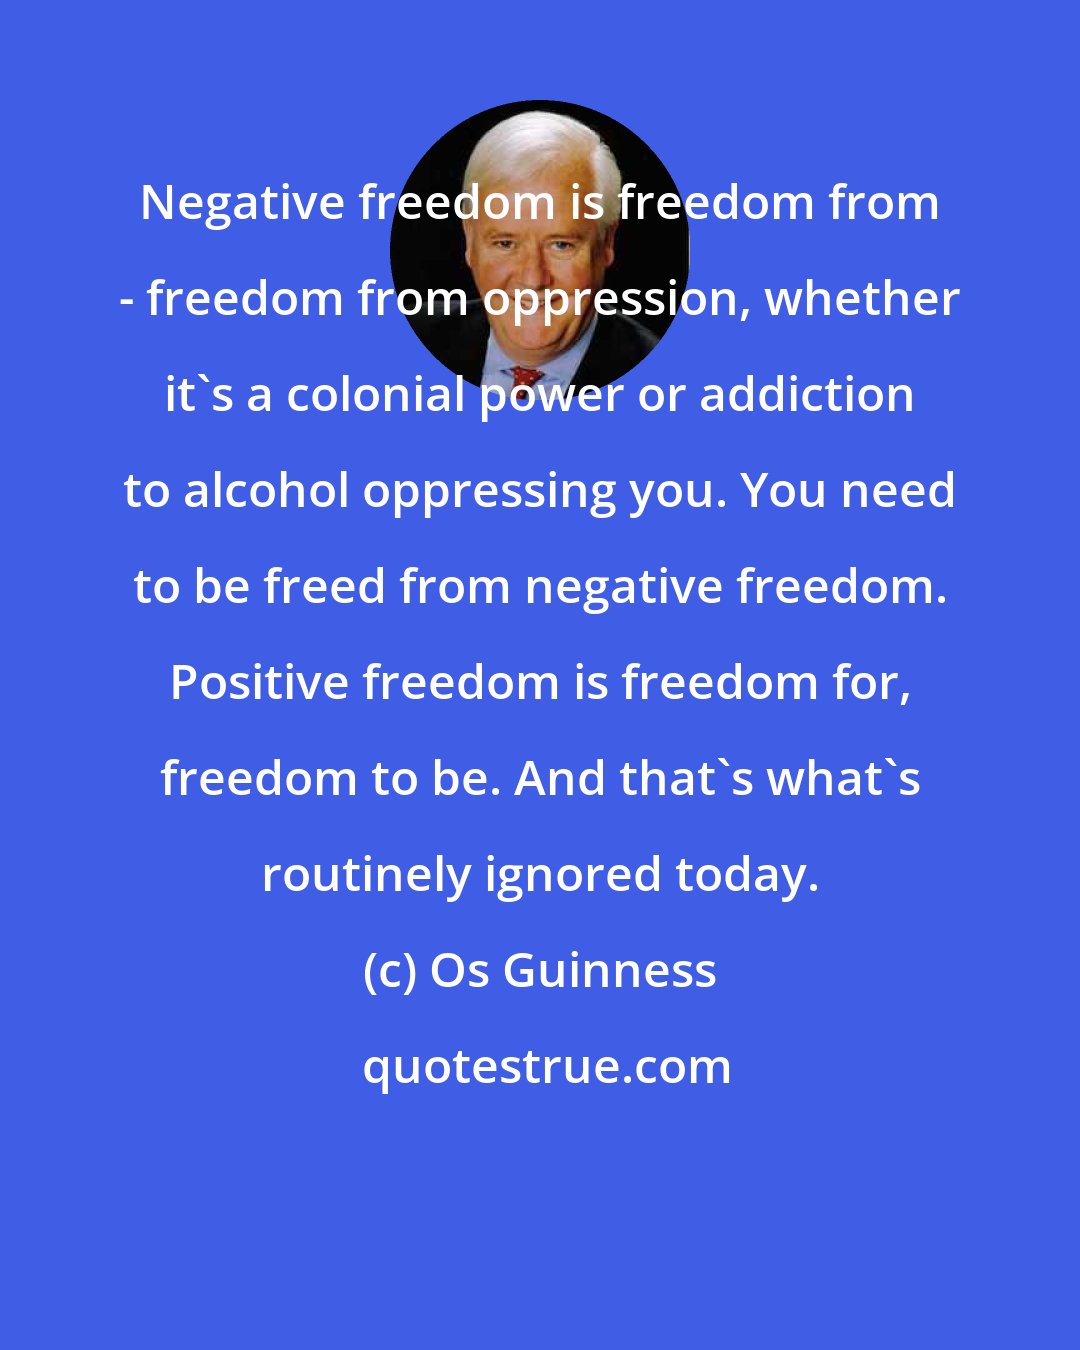 Os Guinness: Negative freedom is freedom from - freedom from oppression, whether it's a colonial power or addiction to alcohol oppressing you. You need to be freed from negative freedom. Positive freedom is freedom for, freedom to be. And that's what's routinely ignored today.